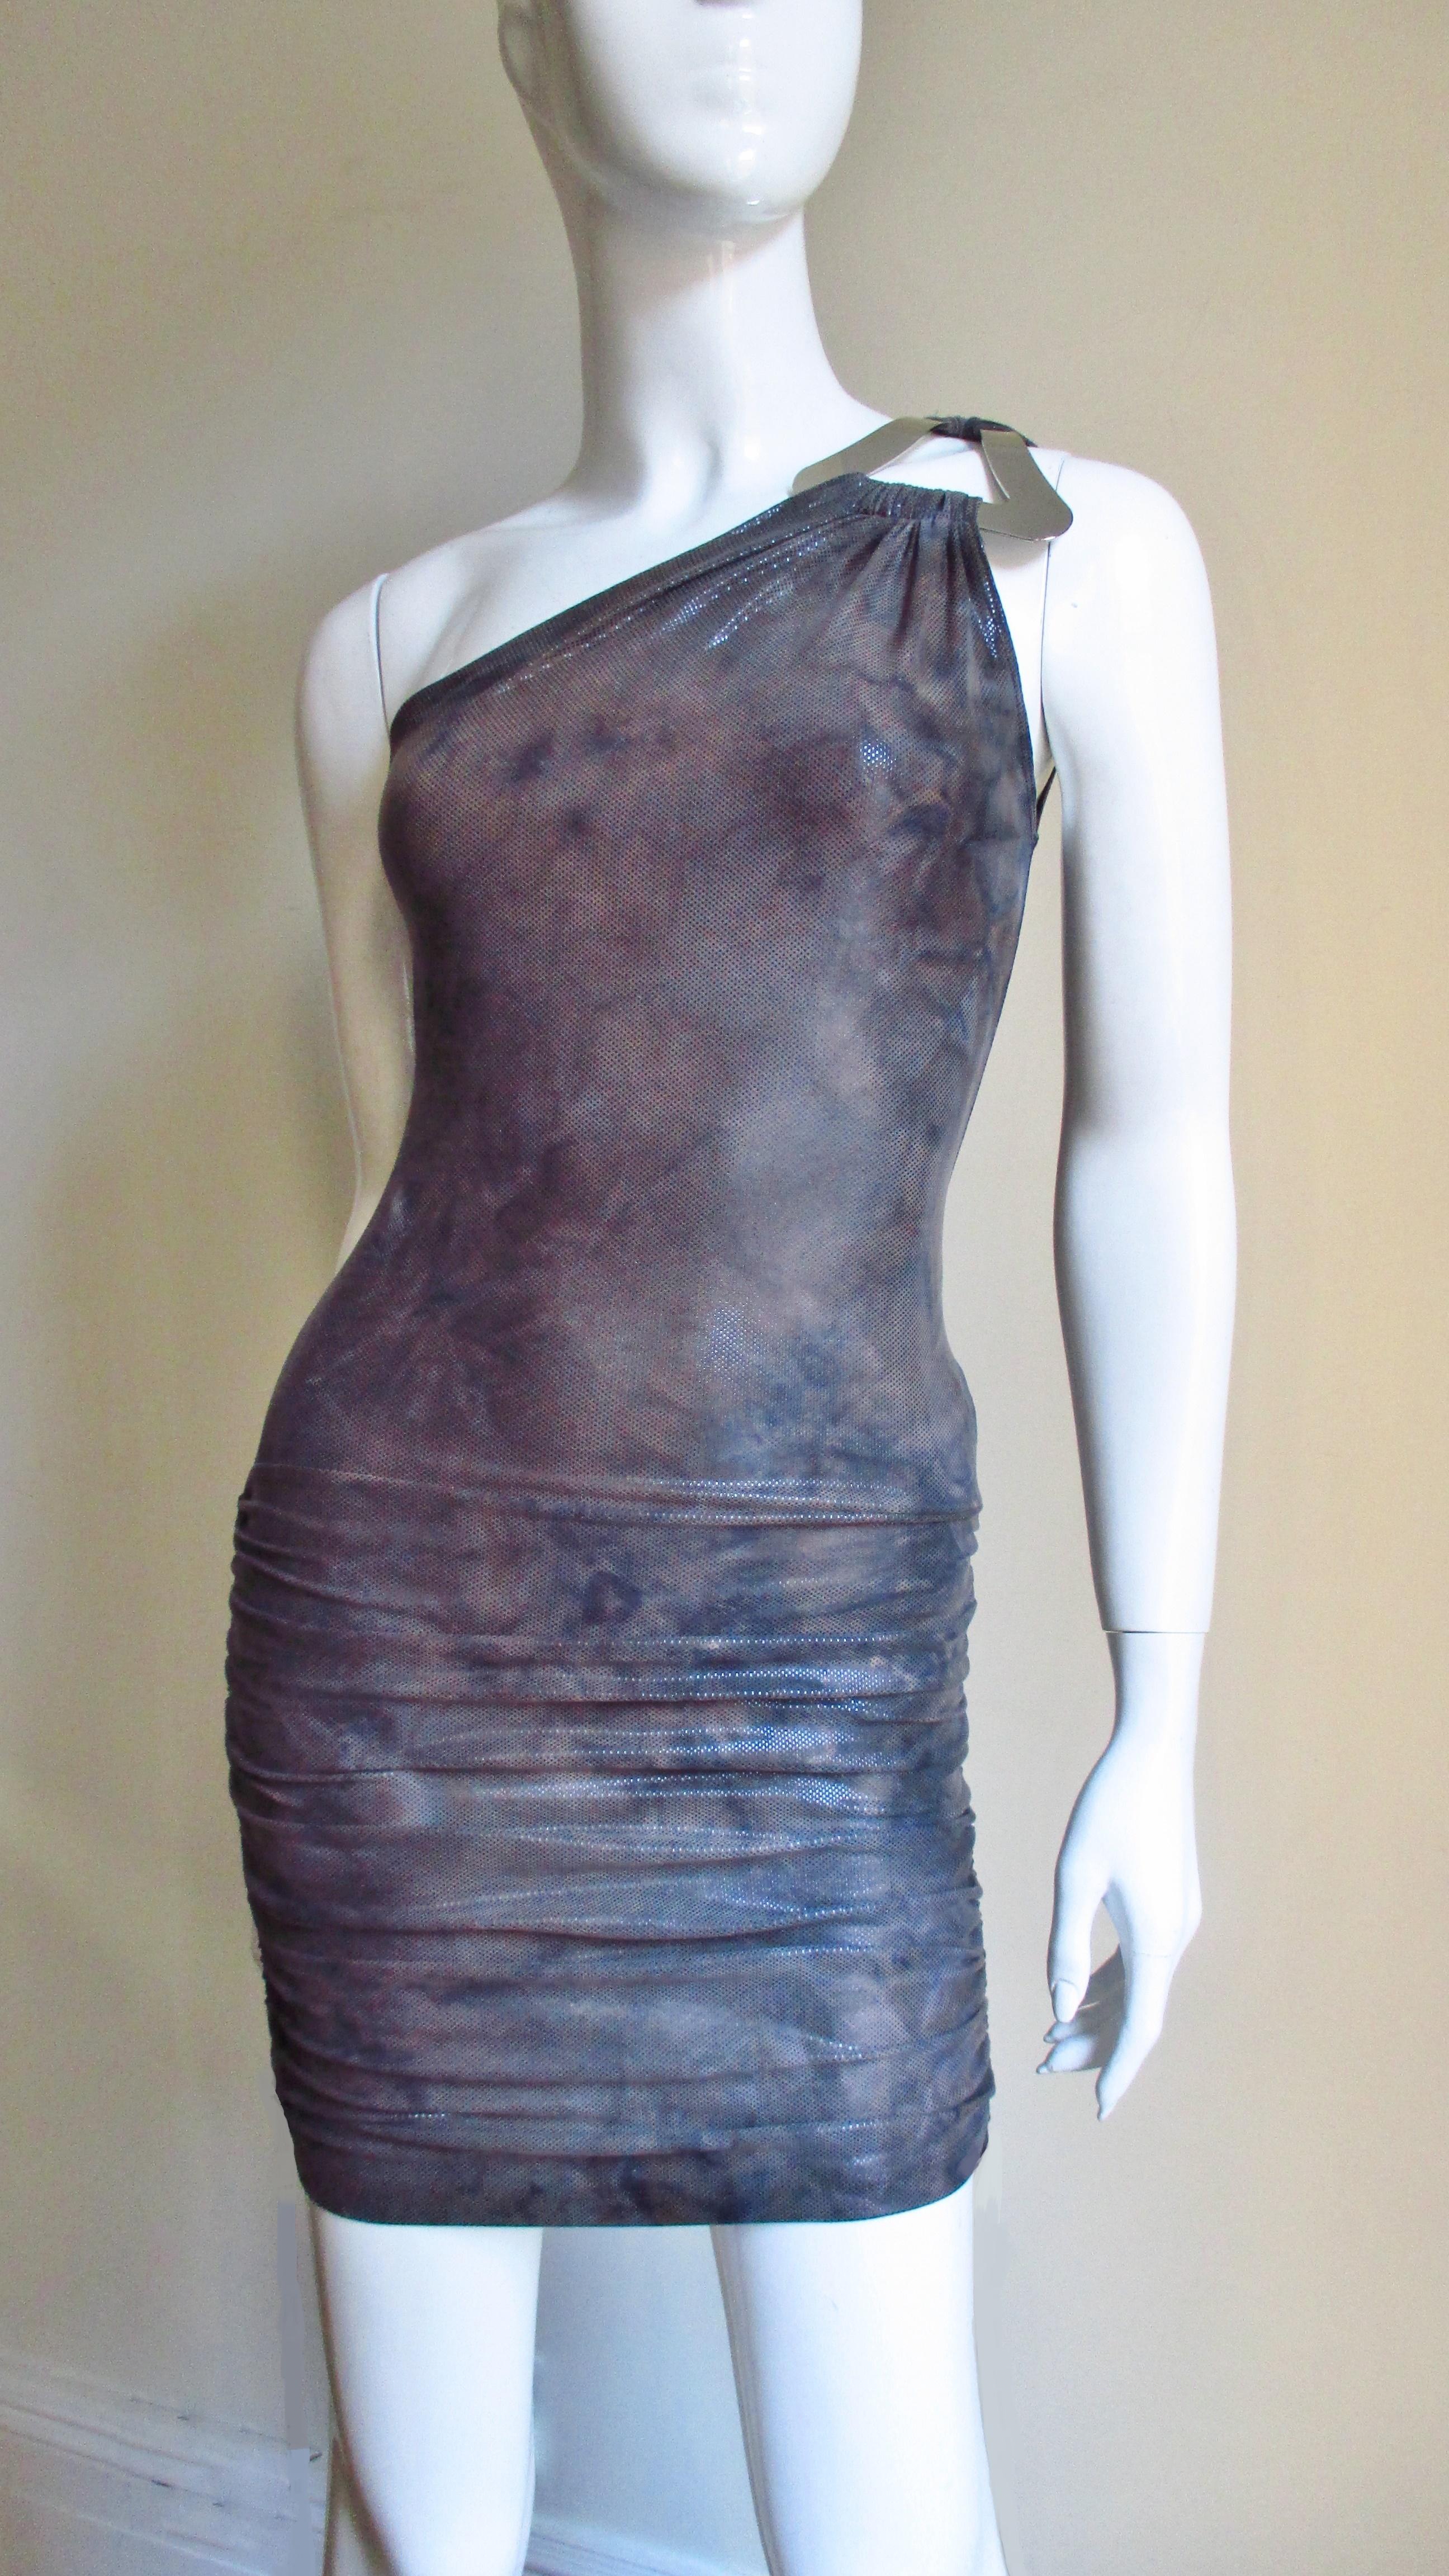 A muted grey and brown synthetic blend knit dress from Gianni Versace Couture with a large silver hardware triangle at the shoulder holding the front and back straps.  It is bare on the other shoulder, fitted through to the hips where it has side